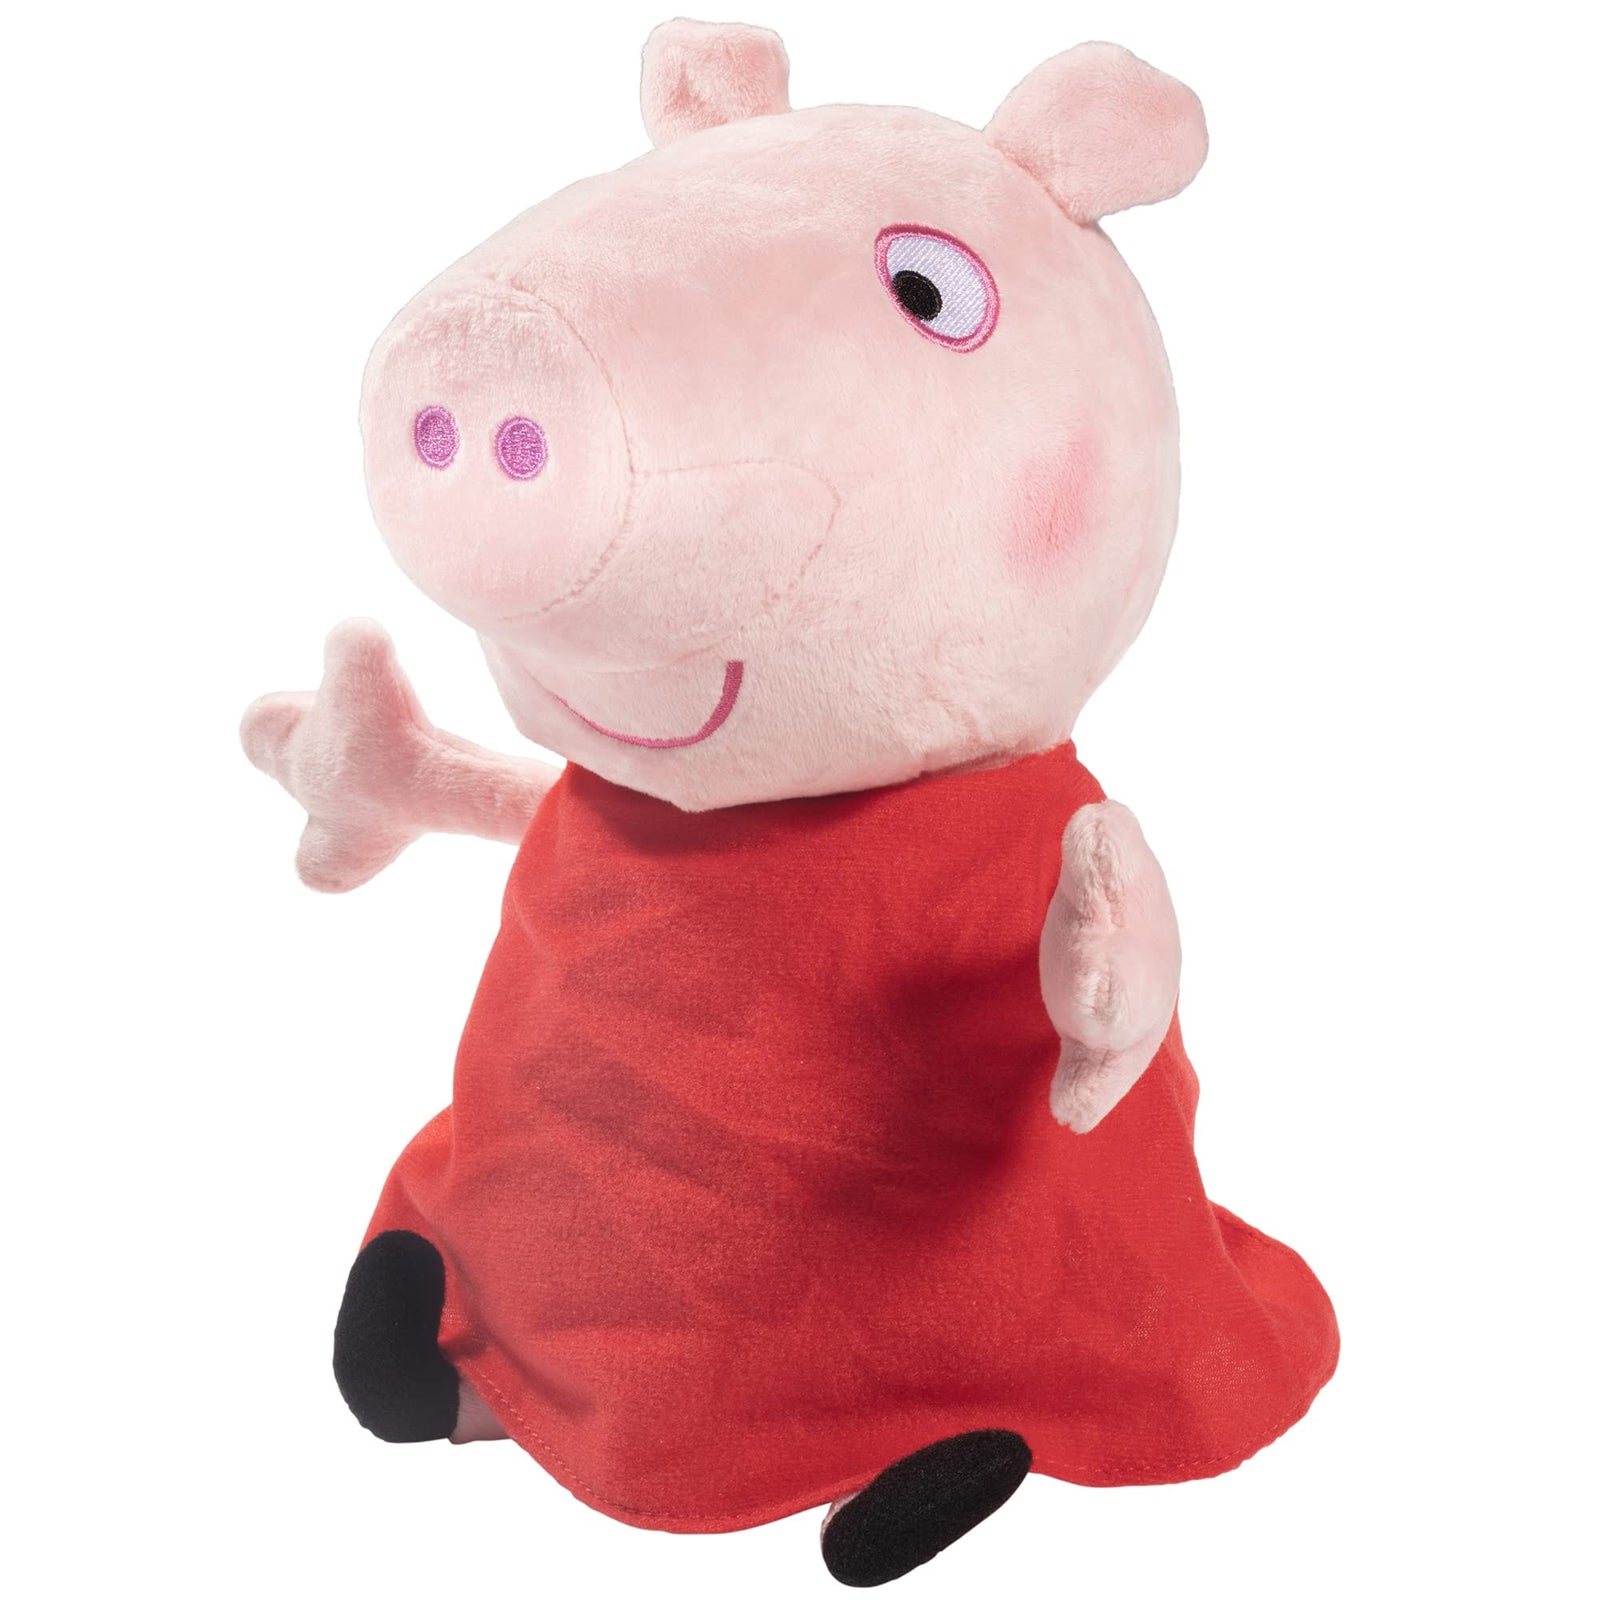 Peppa Pig Hug N' Oink Plush Stuffed Animal Toy, Large 12" - Press Peppa's Belly to Hear Her Talk, Giggle & Oink - Ages 18+ Months